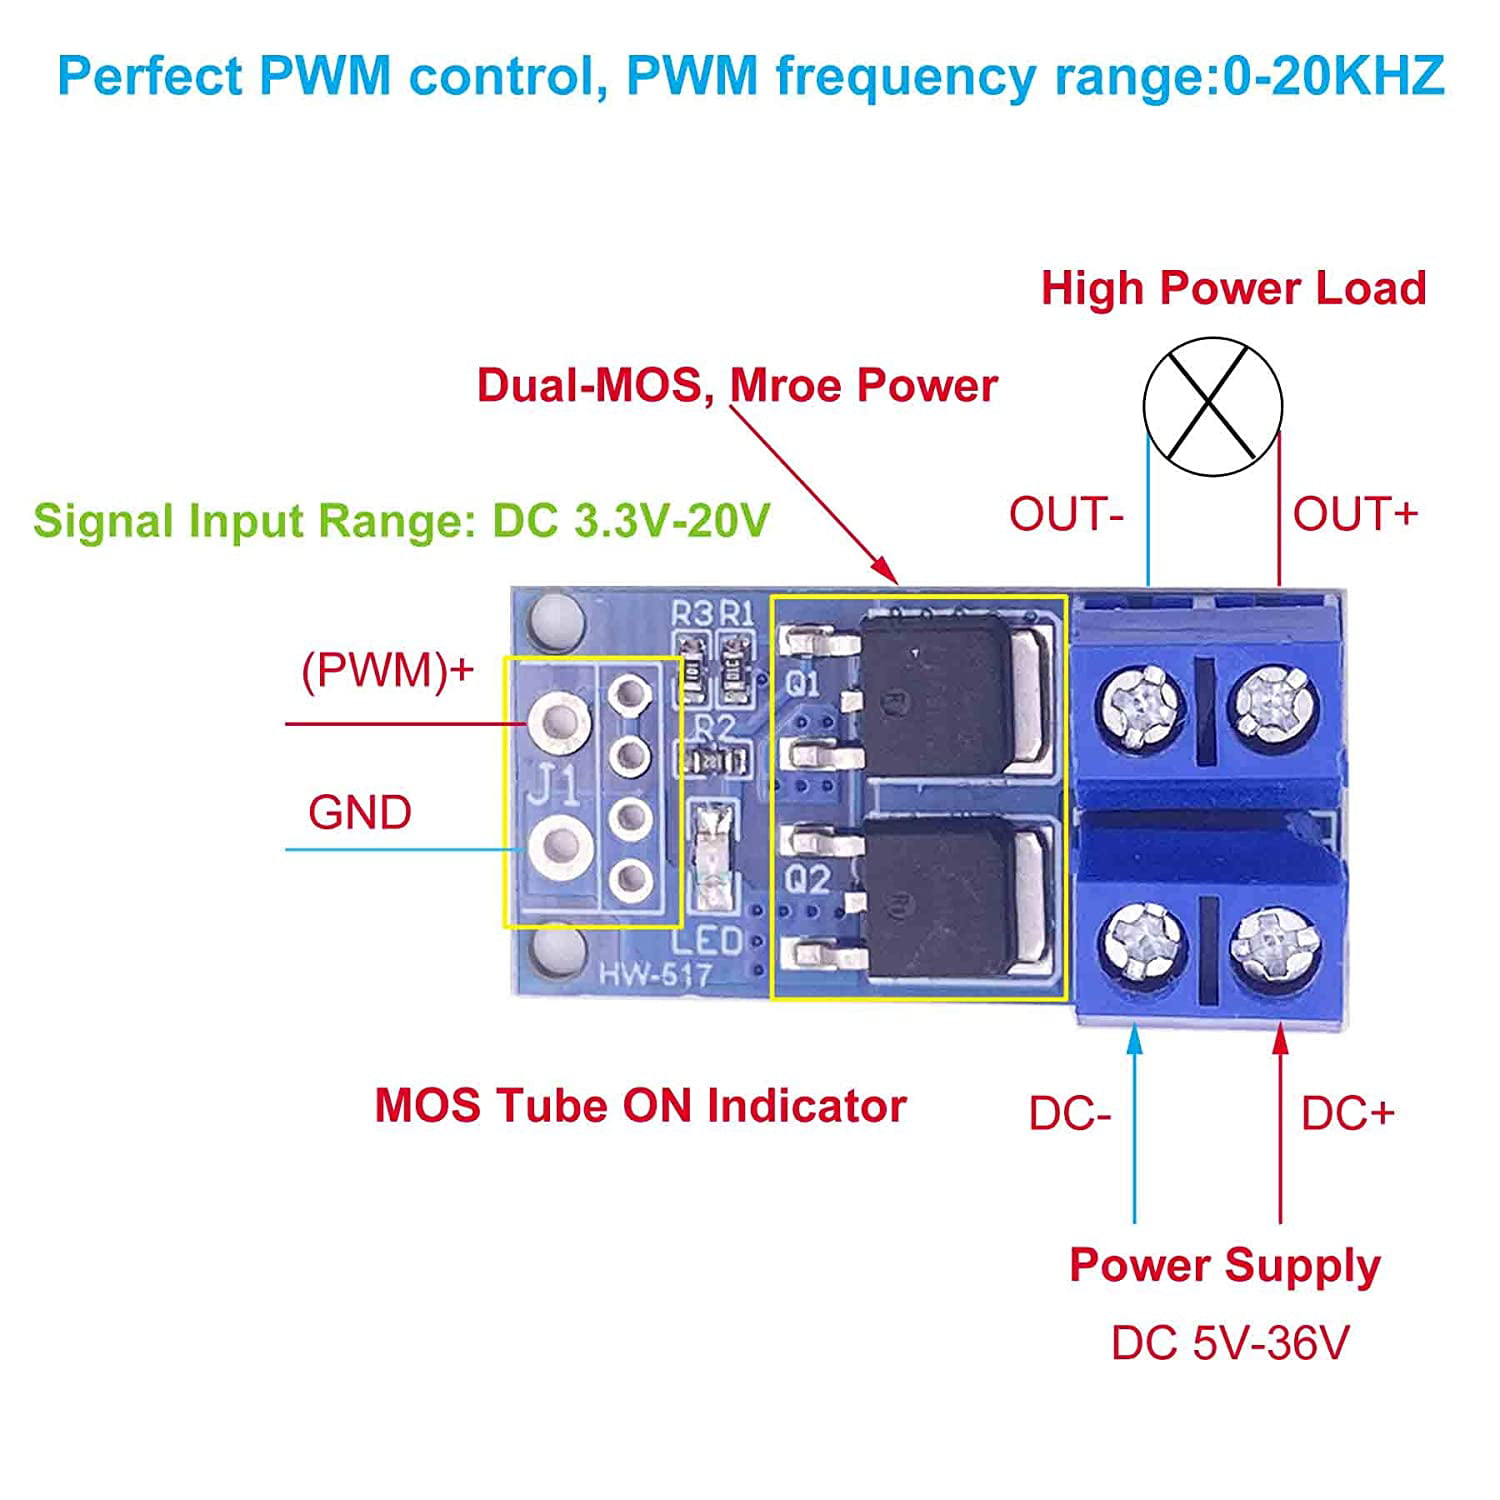 Max 30A 400W Dual High-Power MOSFET Trigger Switch Drive Module 0-20KHz PWM Adjustment Electronic Switch Control Board Motor Speed Control Lamp Brightness Control SongHe 5PCS DC 5V-36V 15A 